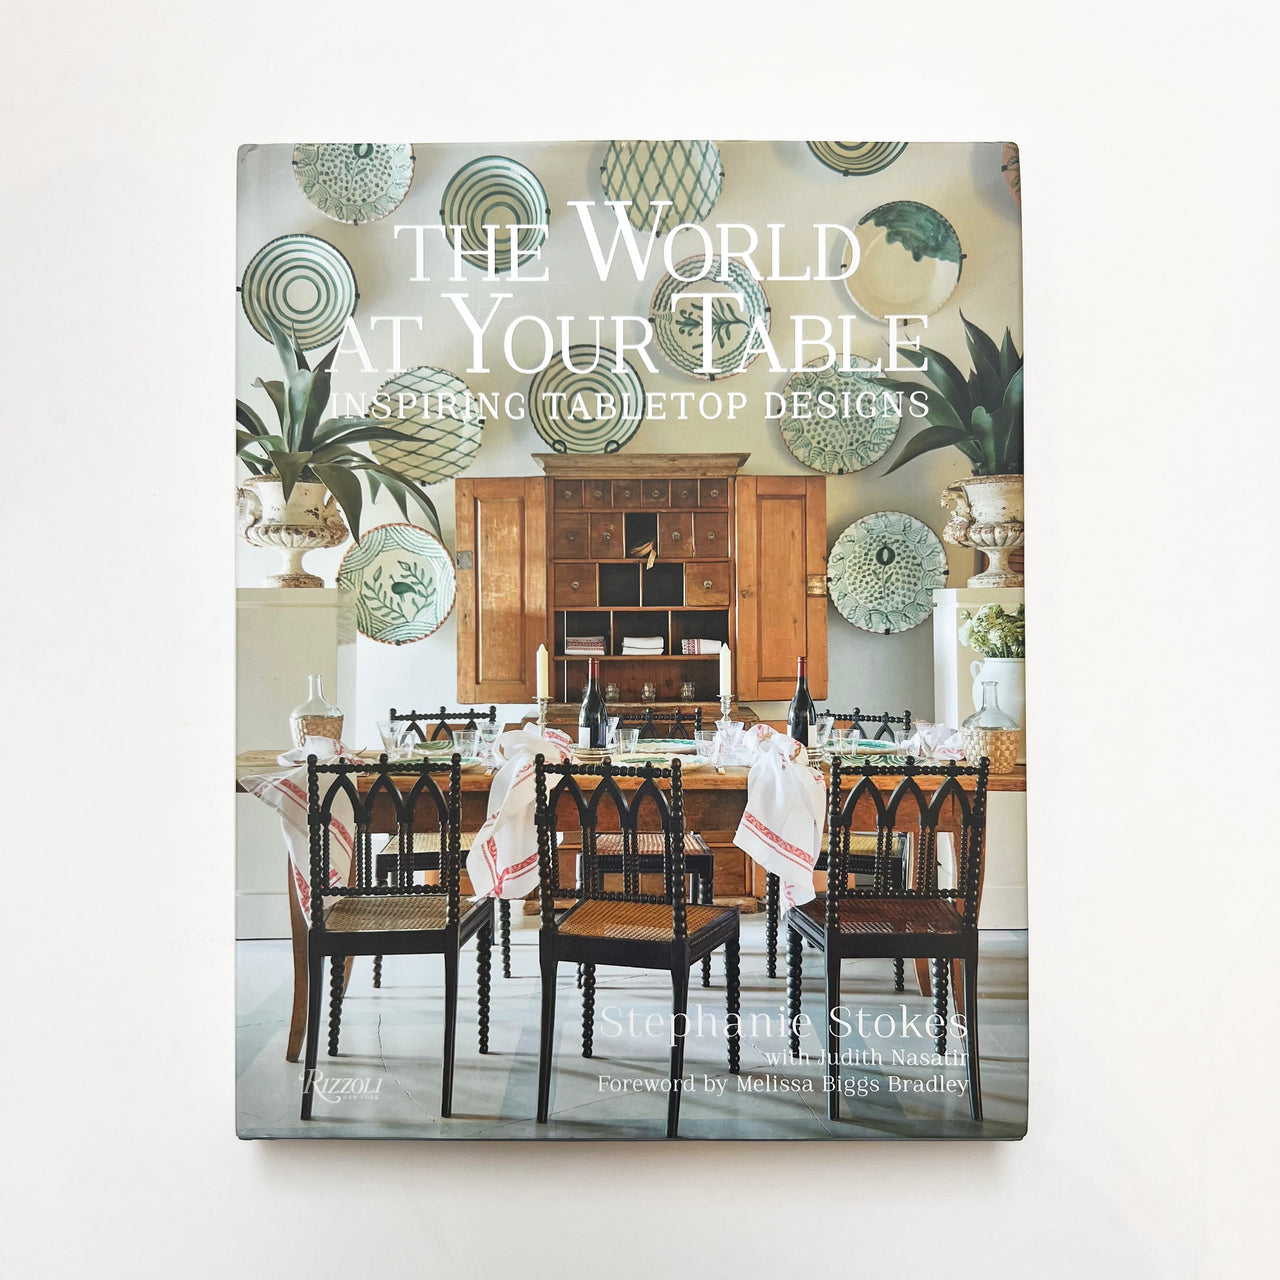 The World At Your Table